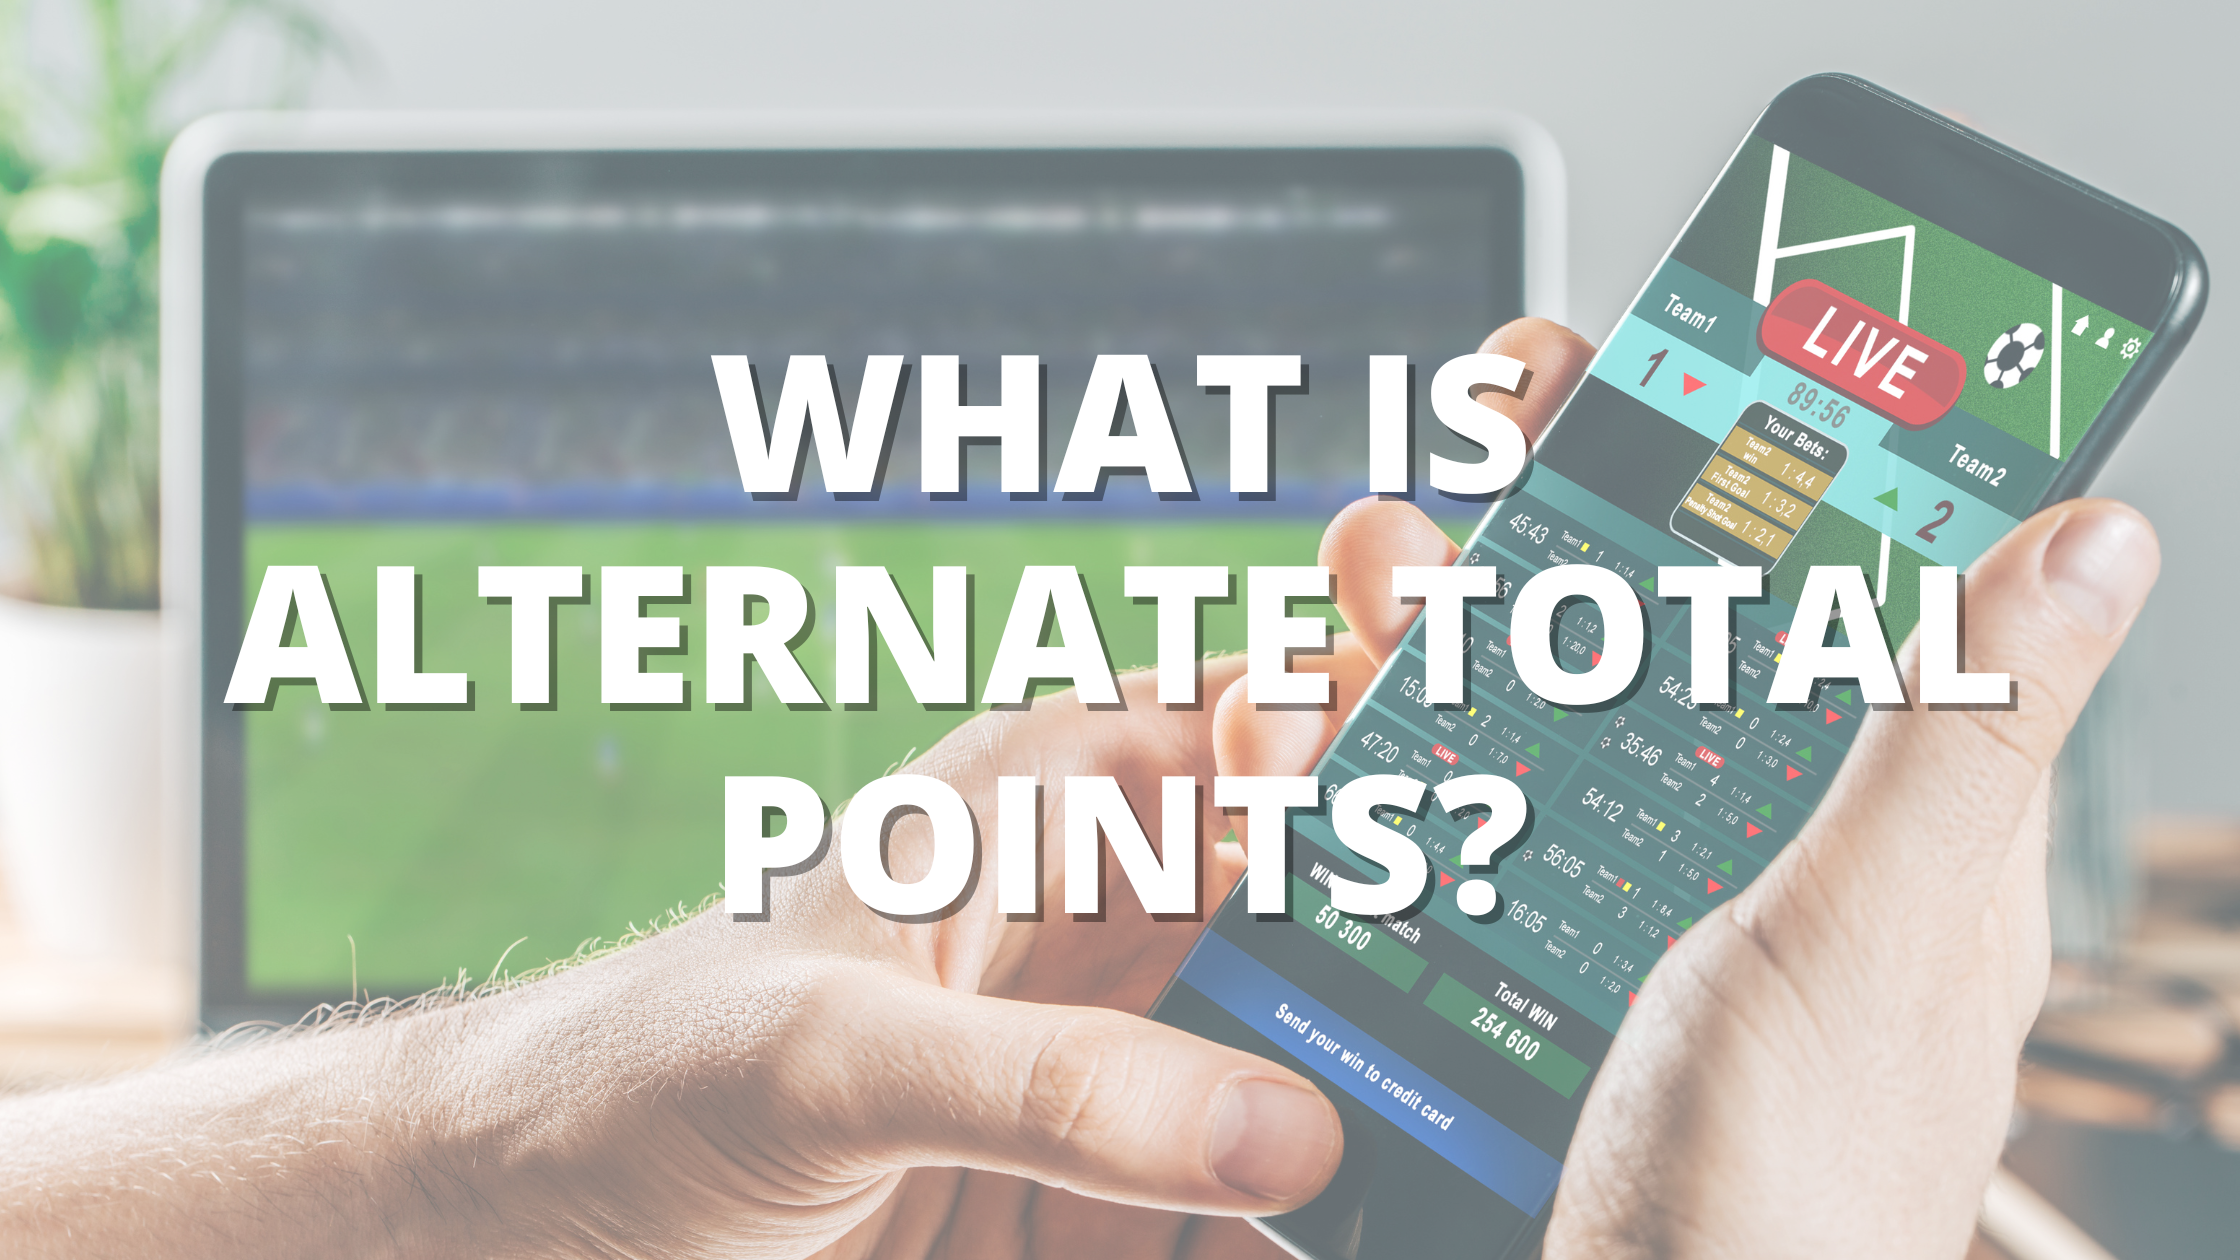 What Is Alternate Total Points?